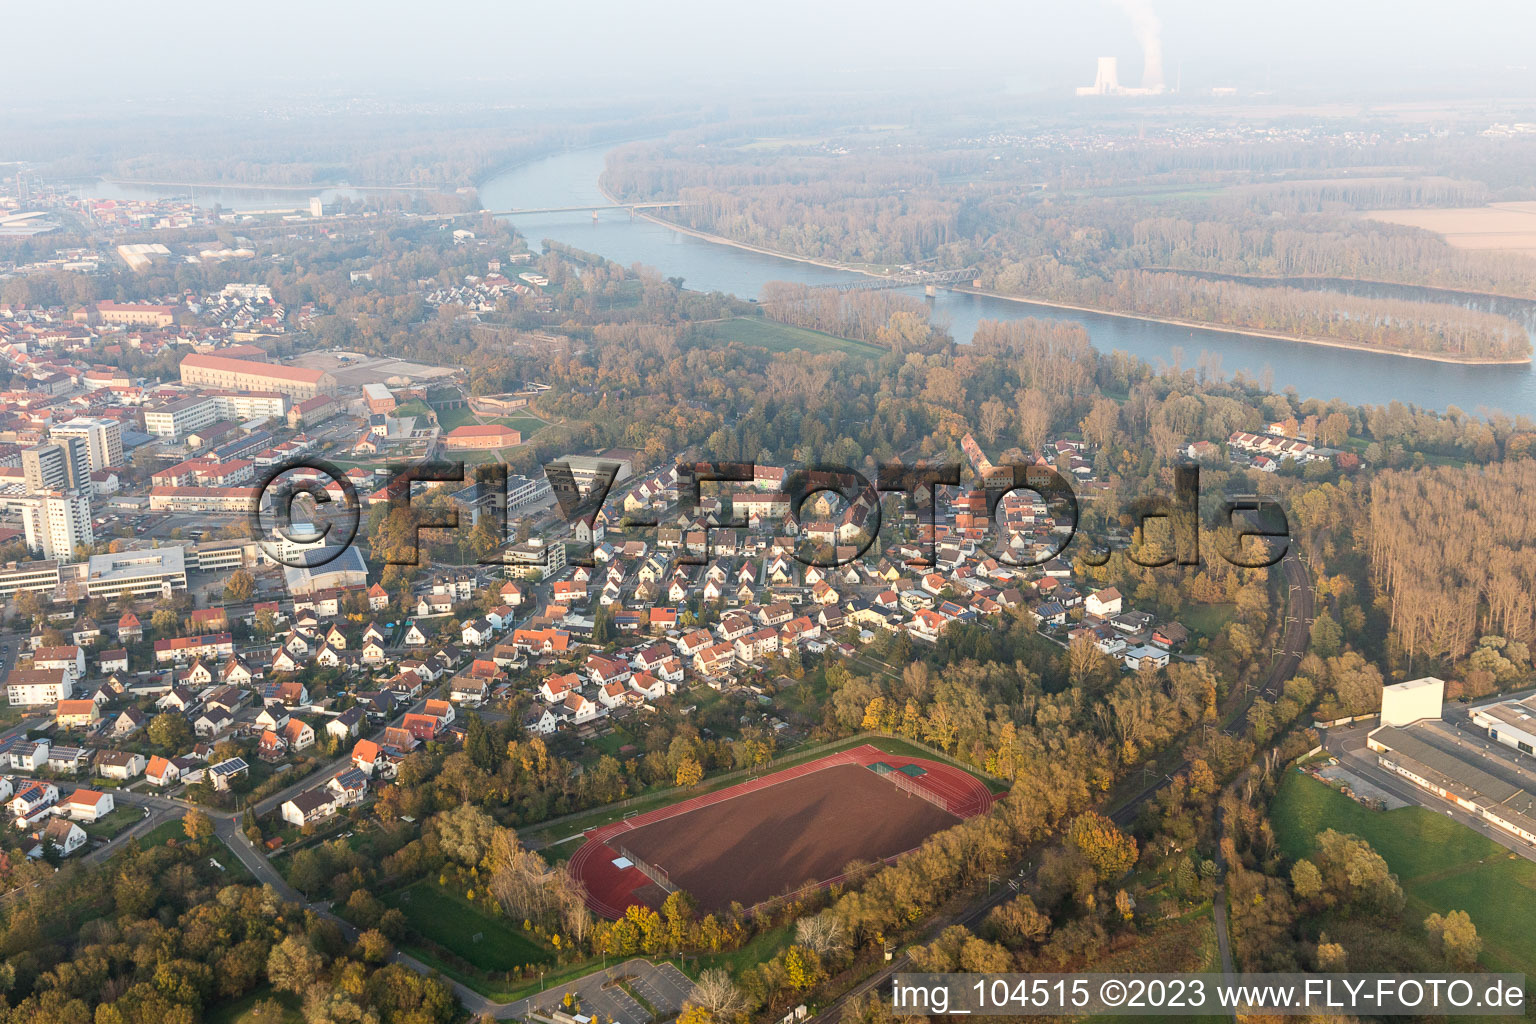 Germersheim in the state Rhineland-Palatinate, Germany from the drone perspective